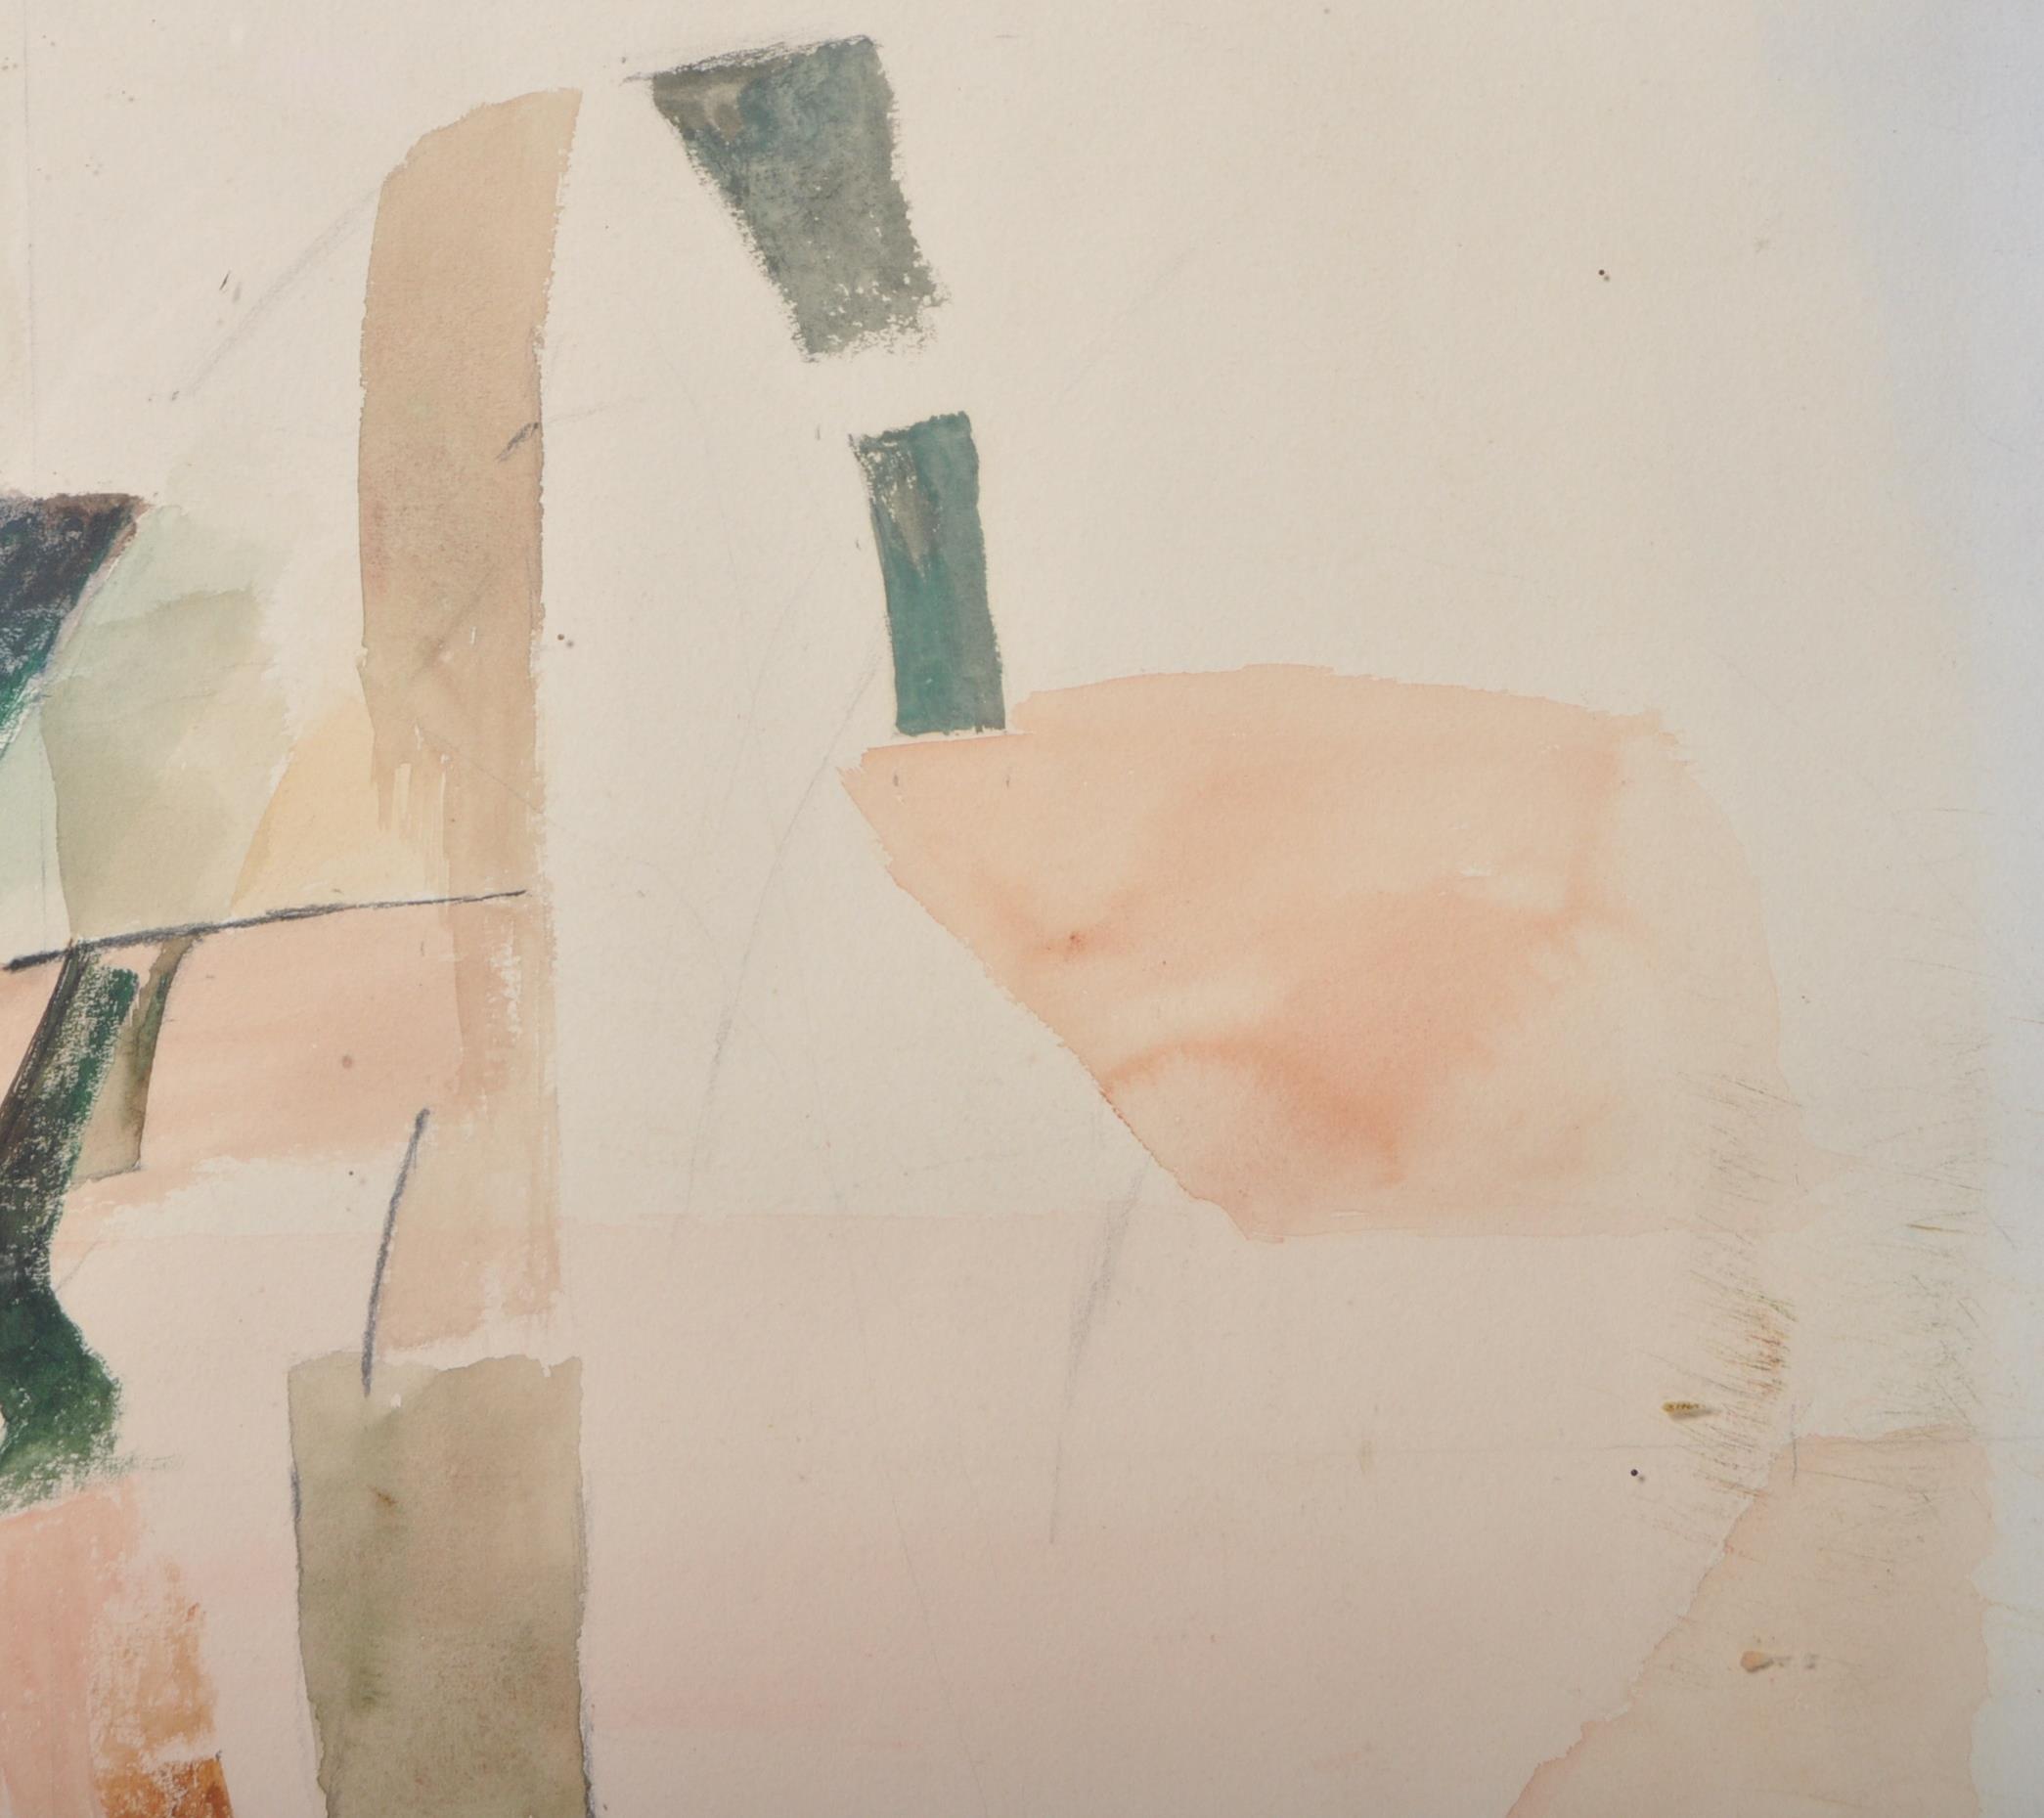 MID 20TH CENTURY FRENCH WATERCOLOUR ABSTRACT PAINTING - Image 4 of 7